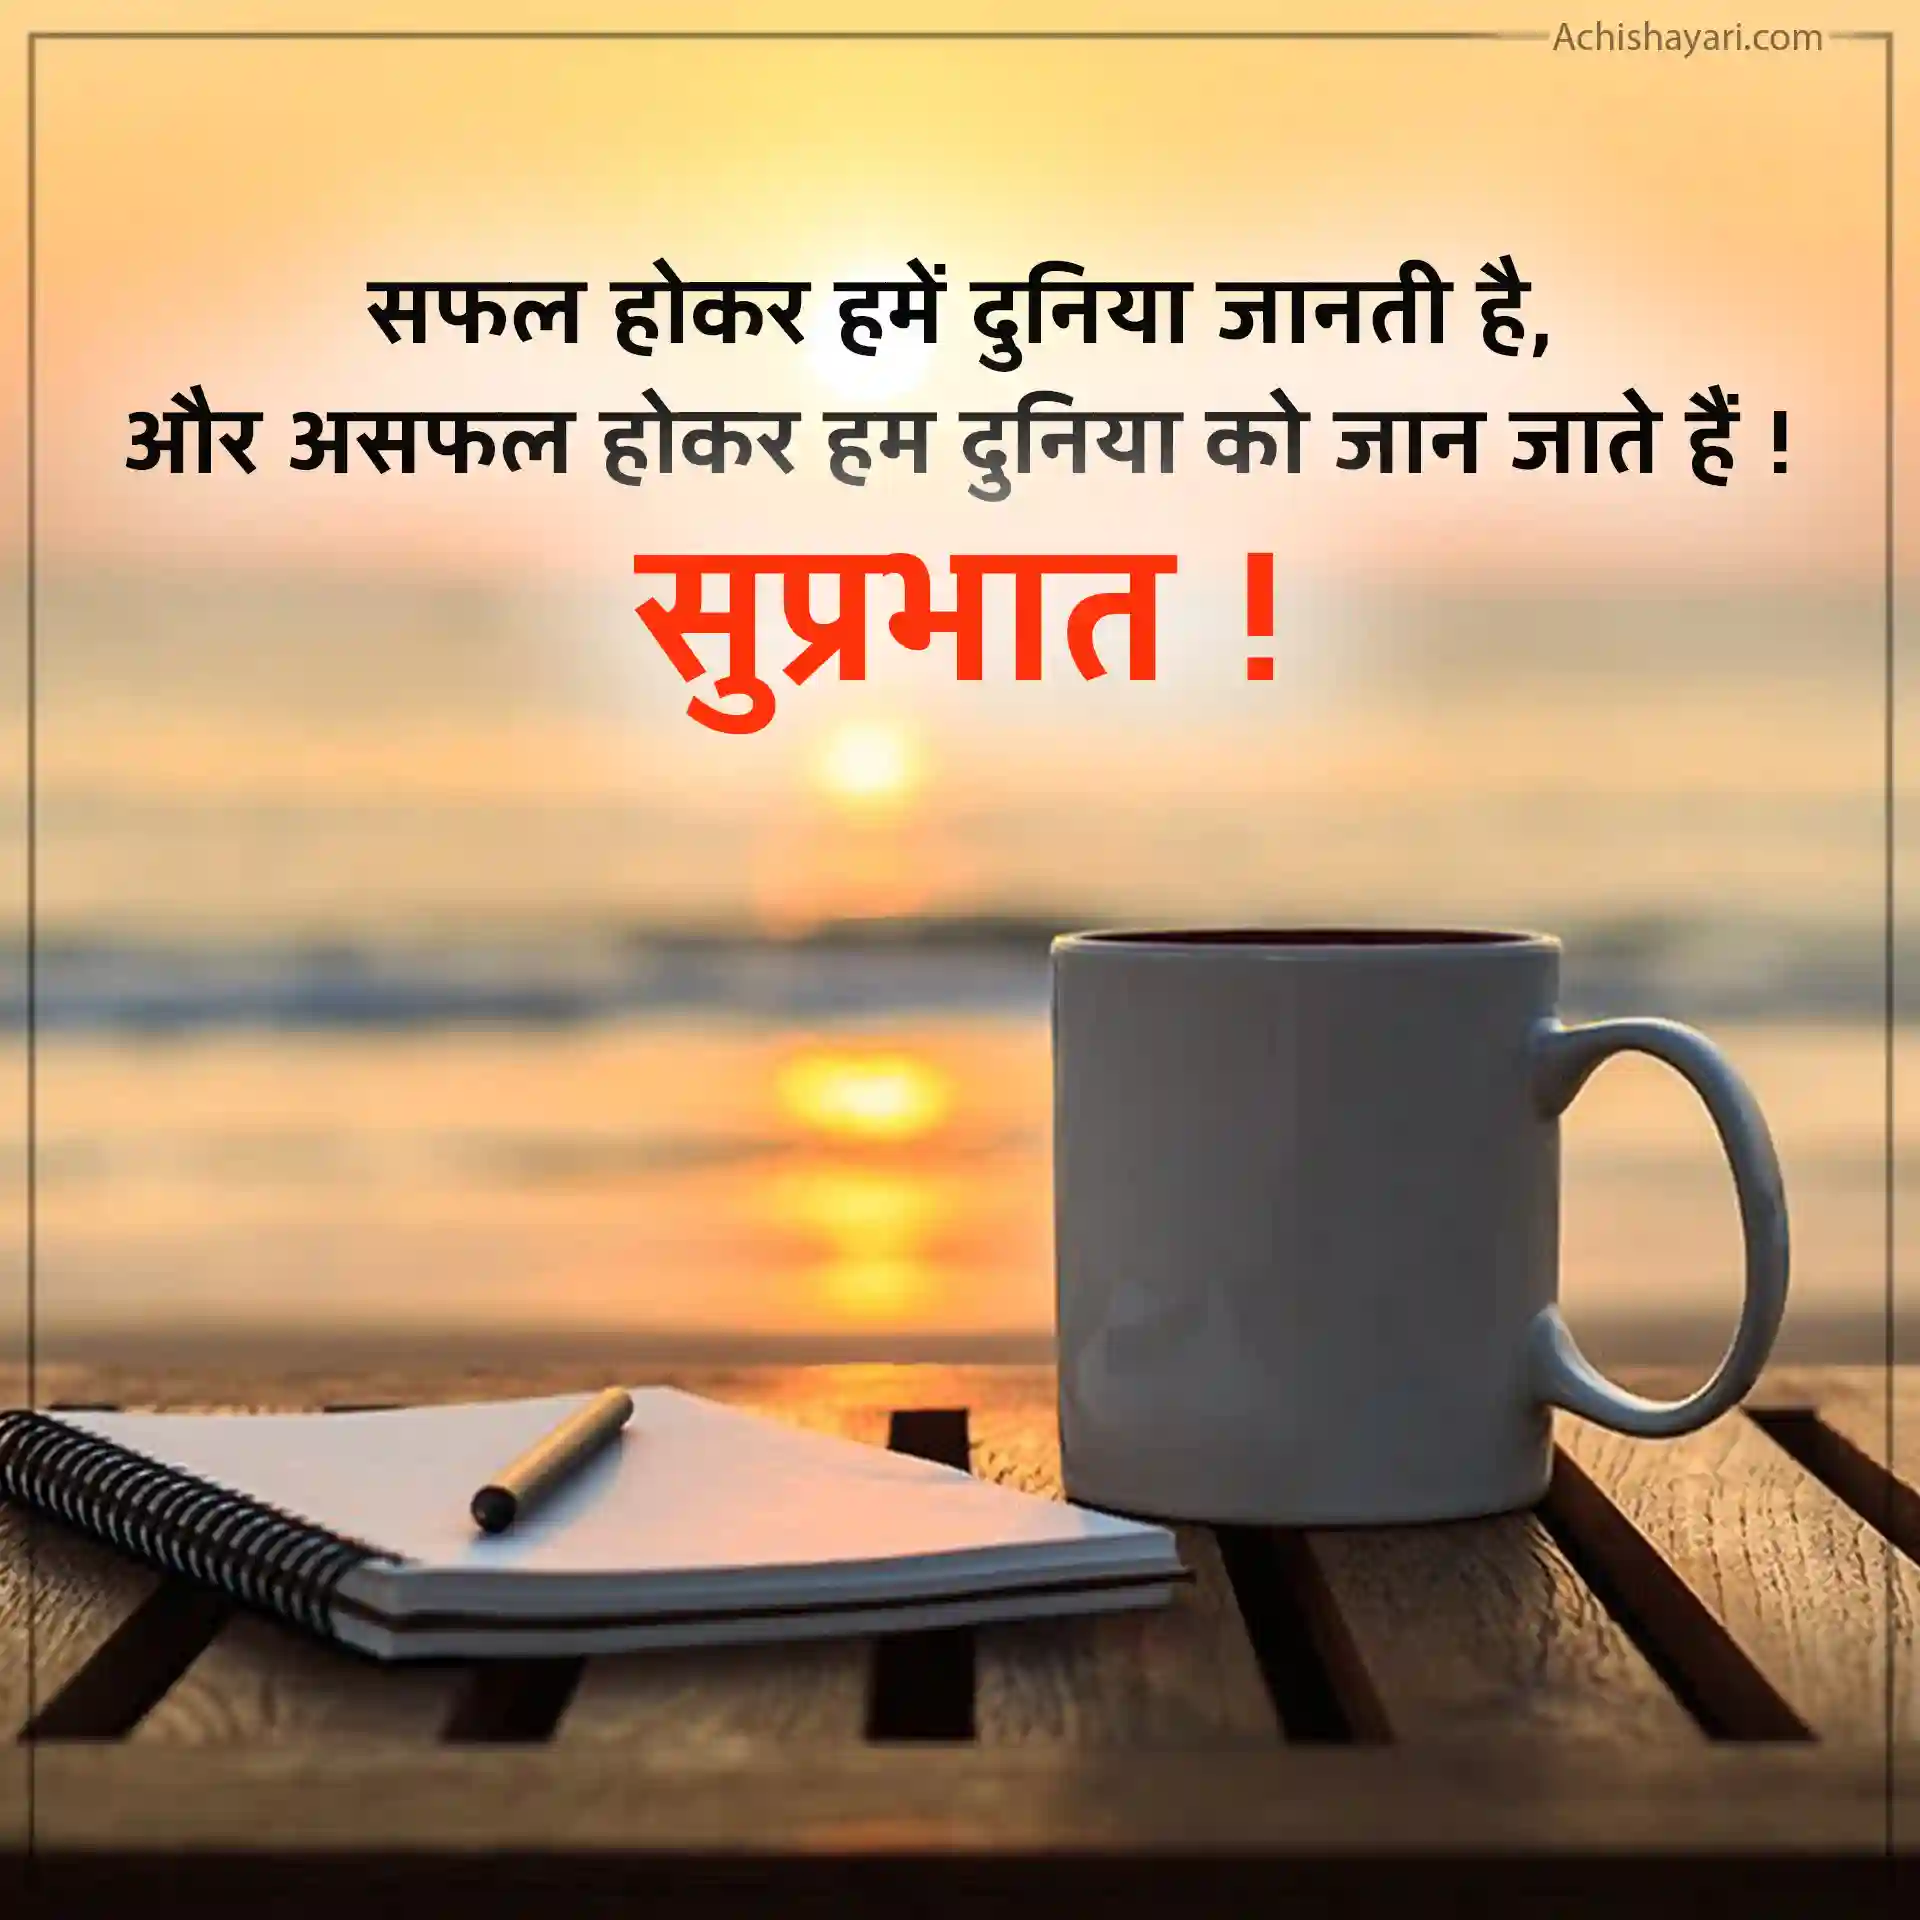 Good-Morning-Quotes-Hindi Mein